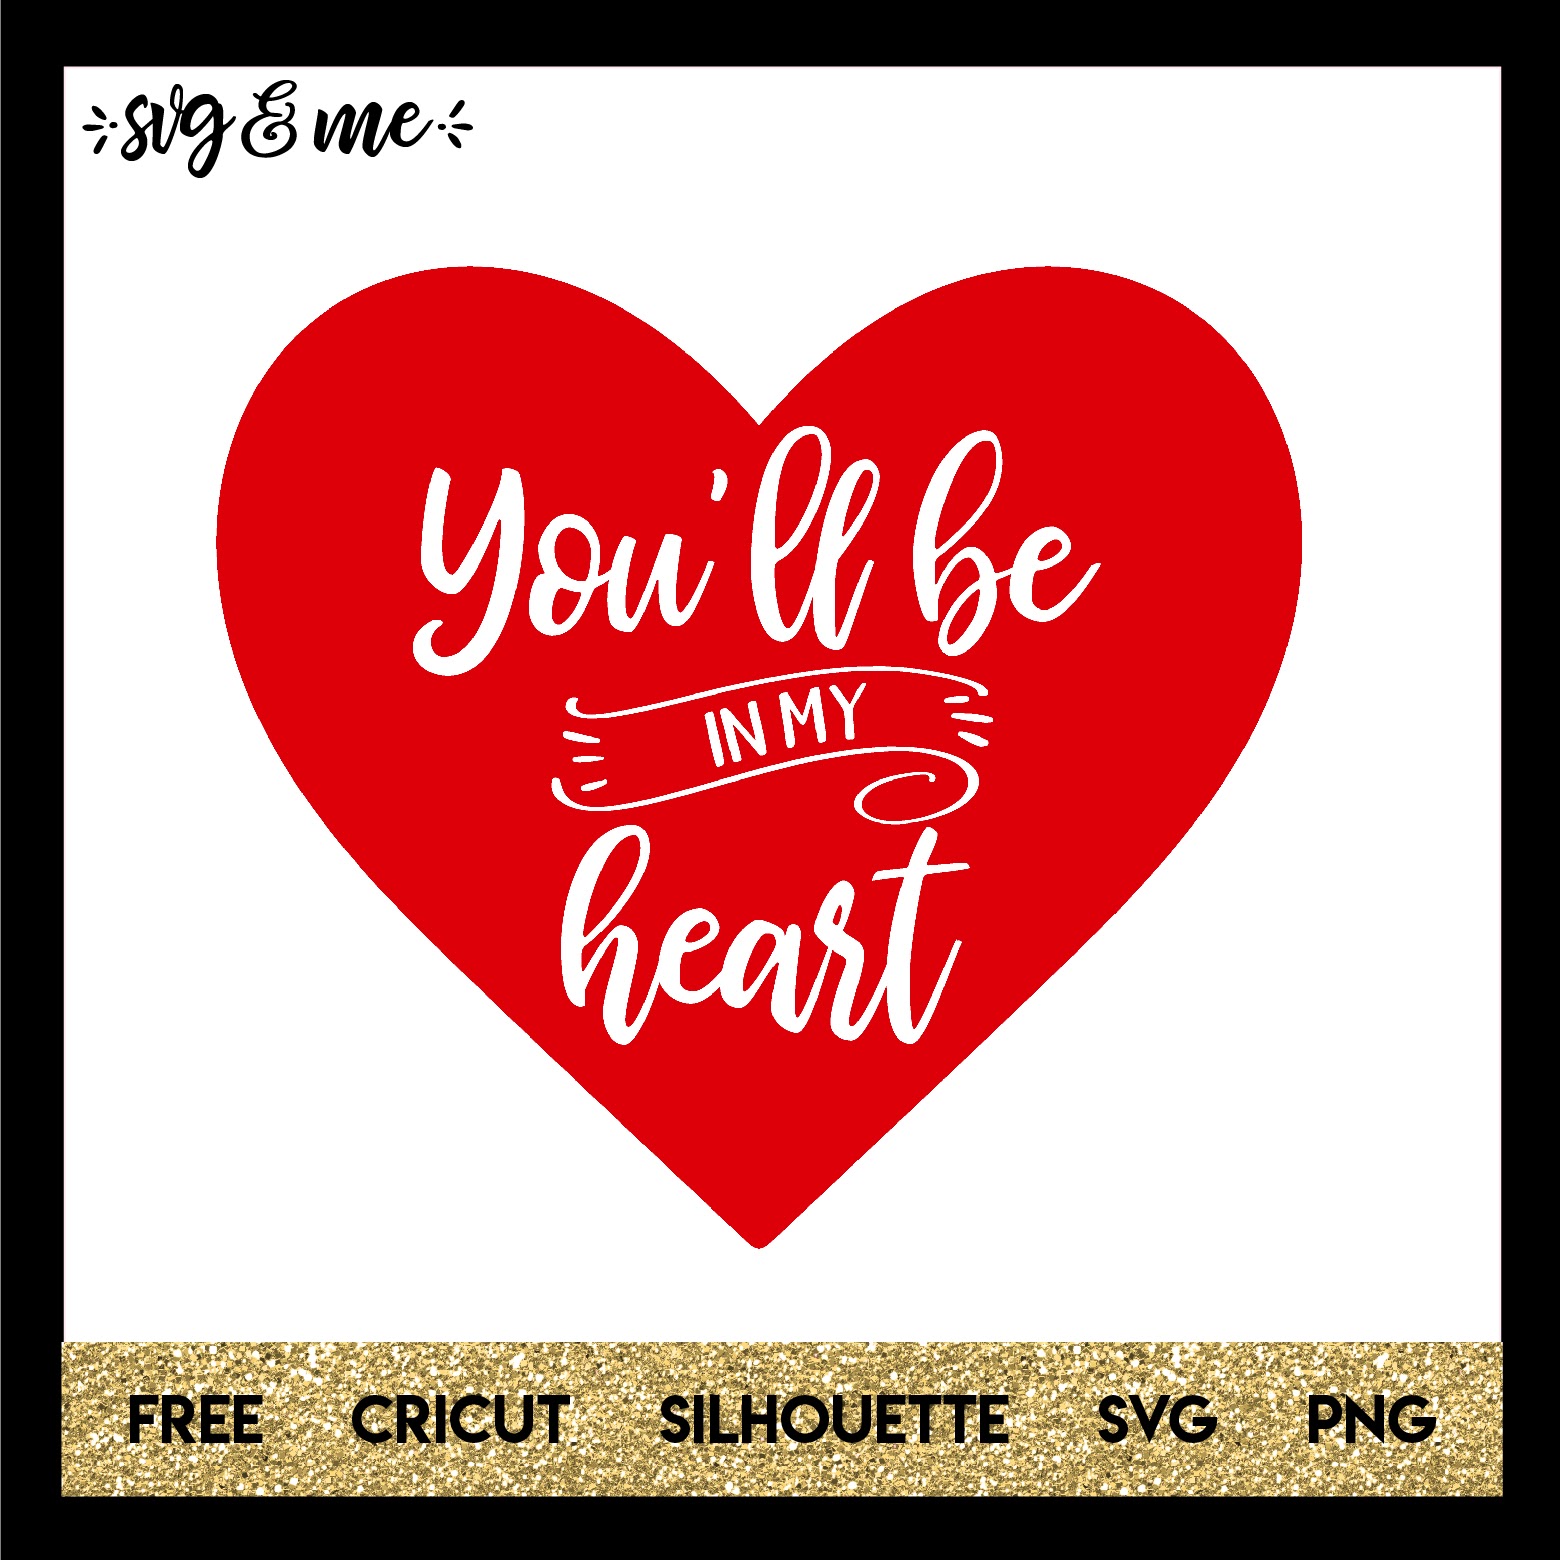 Download 27+ Happy Valentines Day Free Svg Images